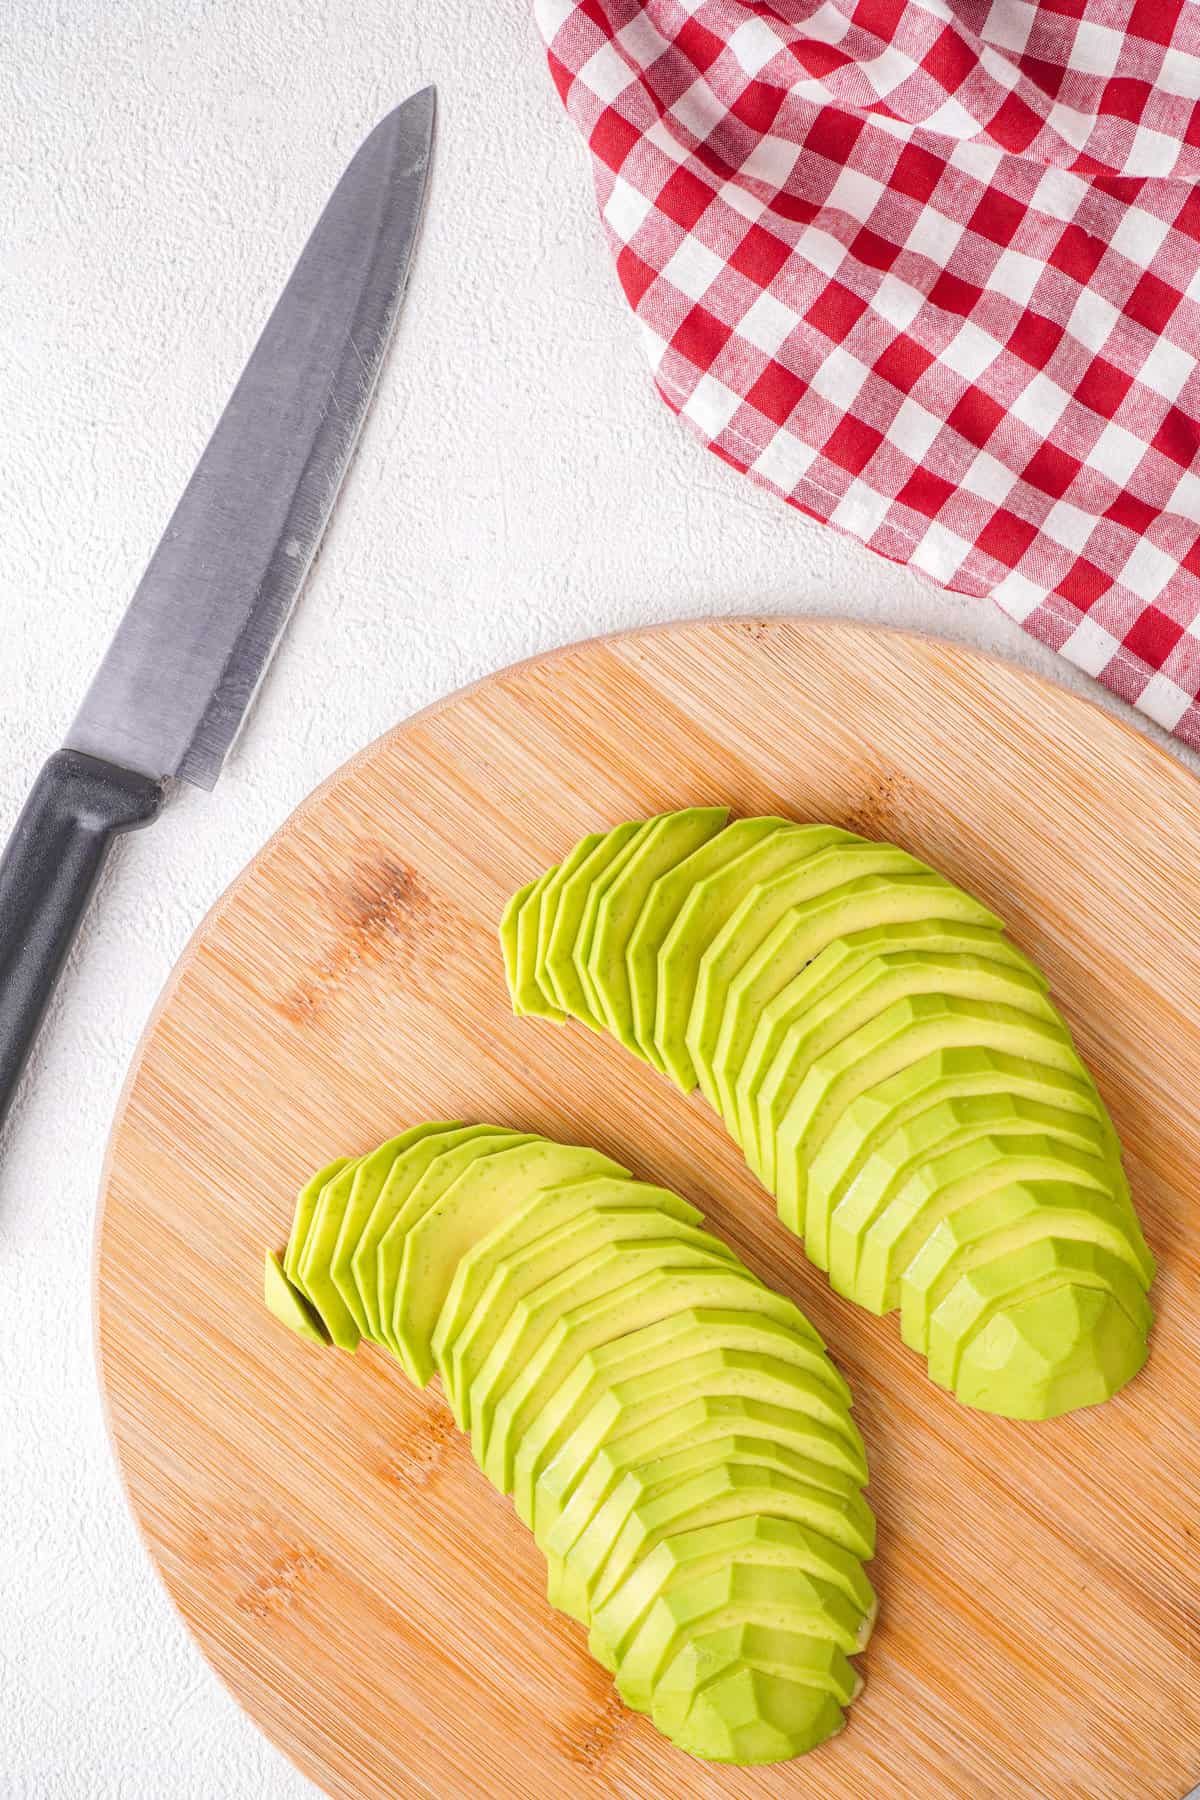 Overhead view of avocado slices on a wooden board